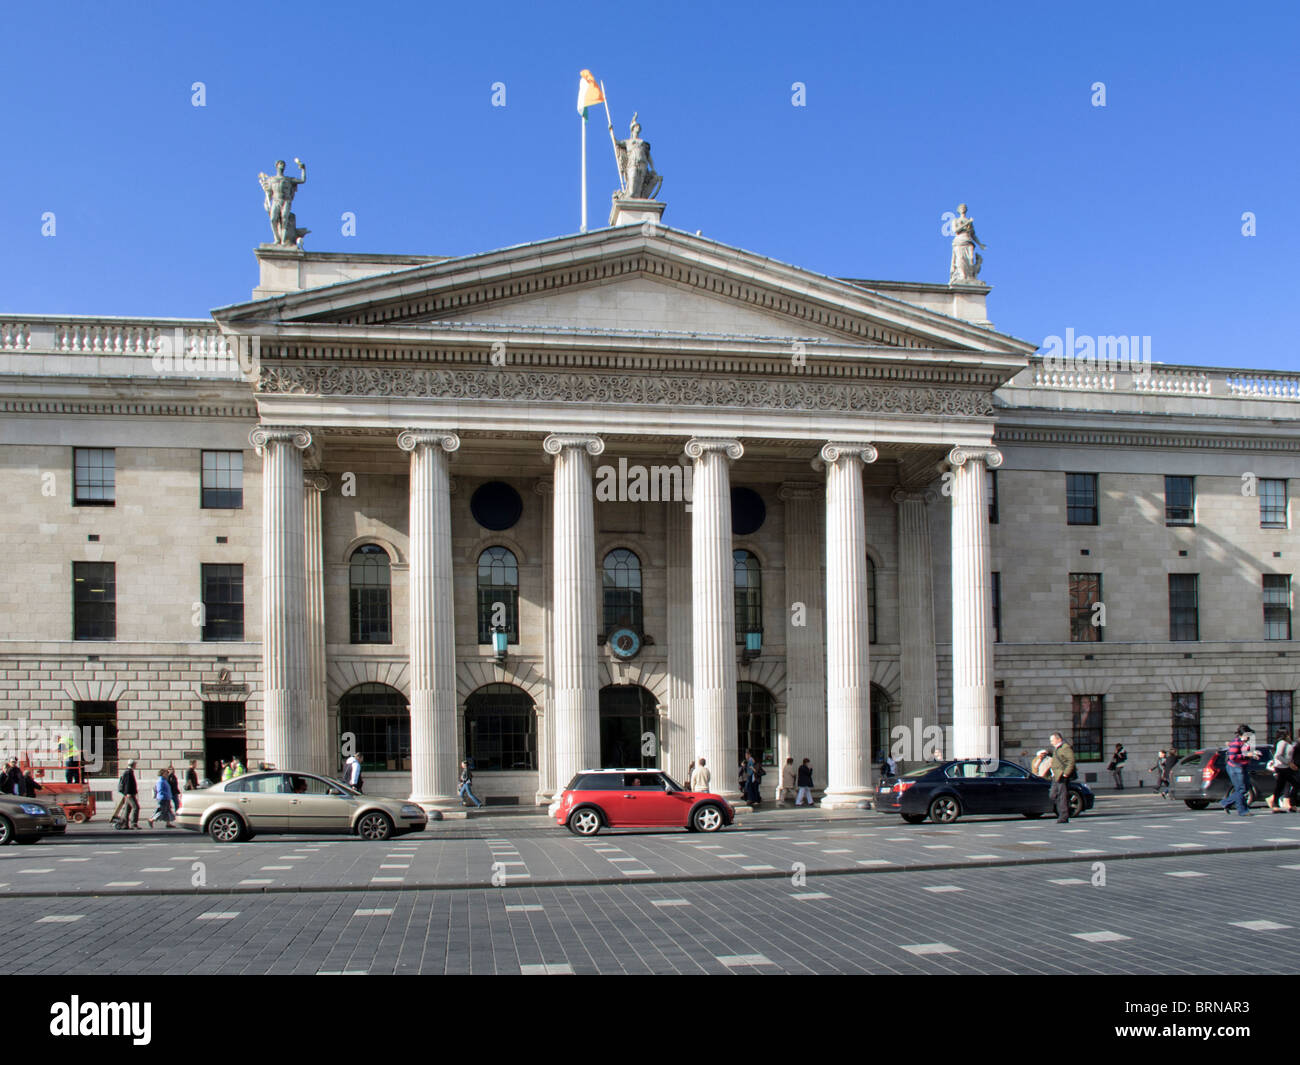 Le GPO (General Post Office), O'Connell Street, Dublin, Irlande Banque D'Images